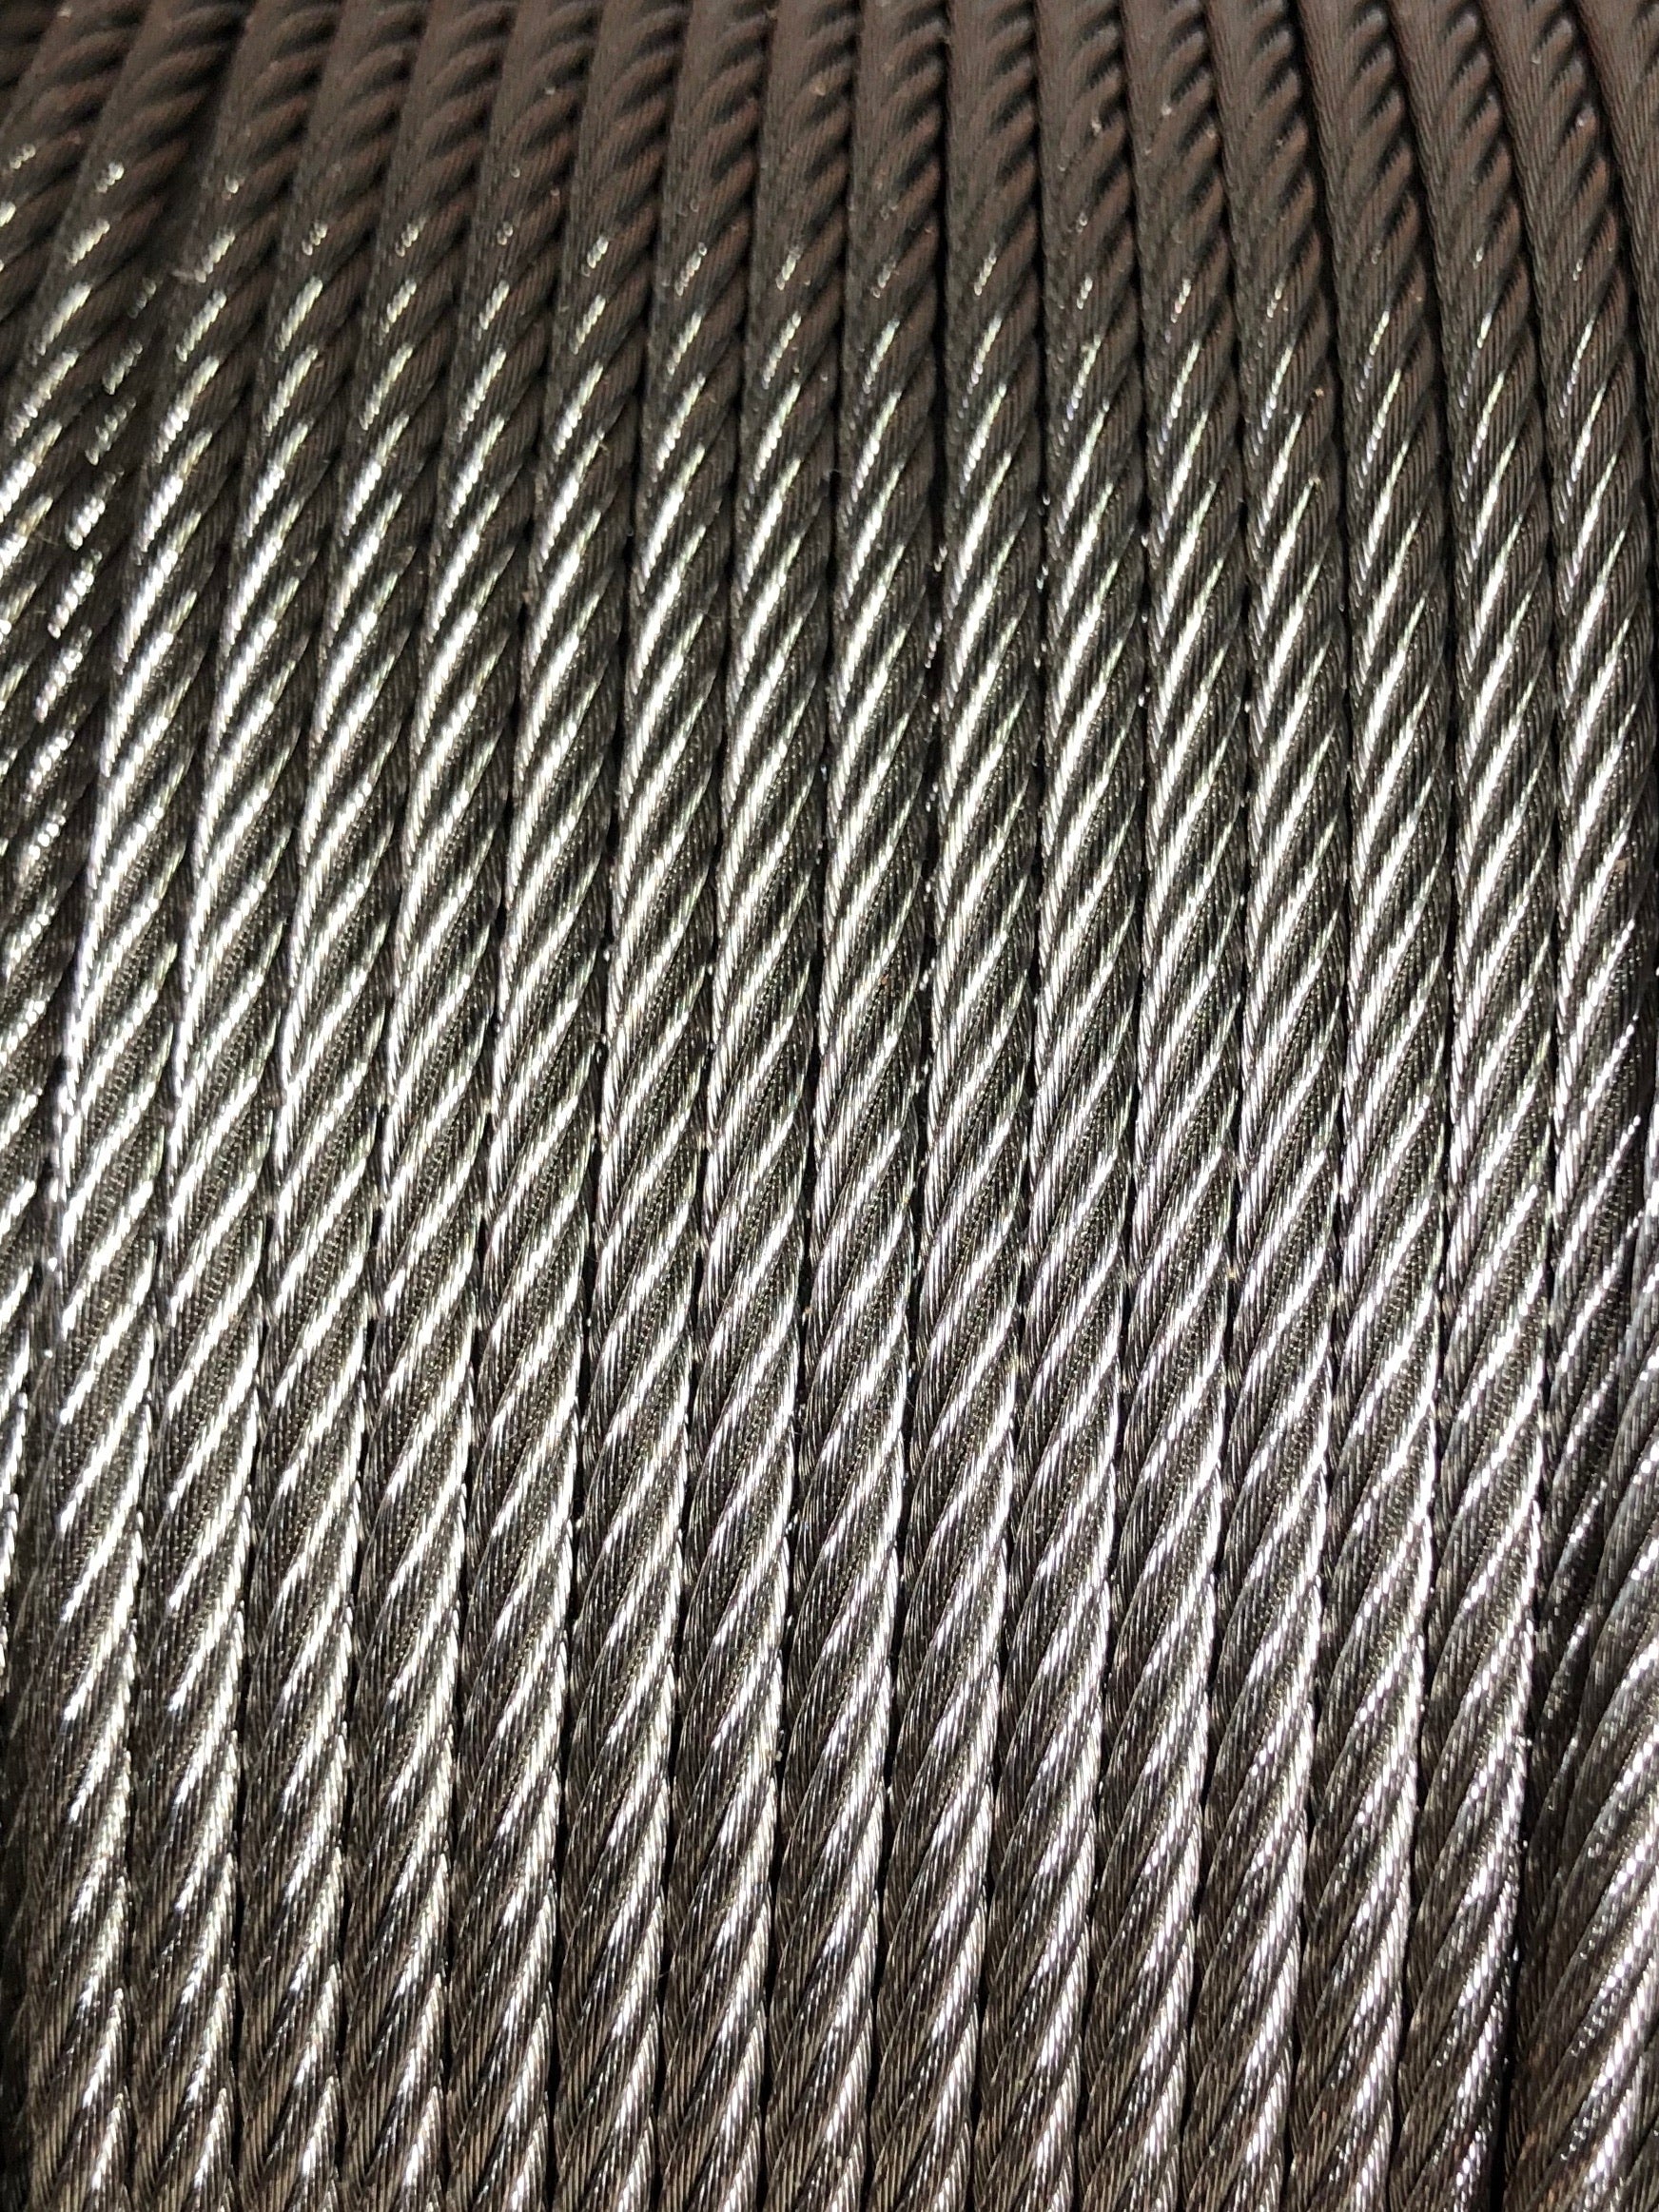 Specifications of stainless steel cable mesh - Stainless Steel Cable Mesh  Supplier - LIULIN